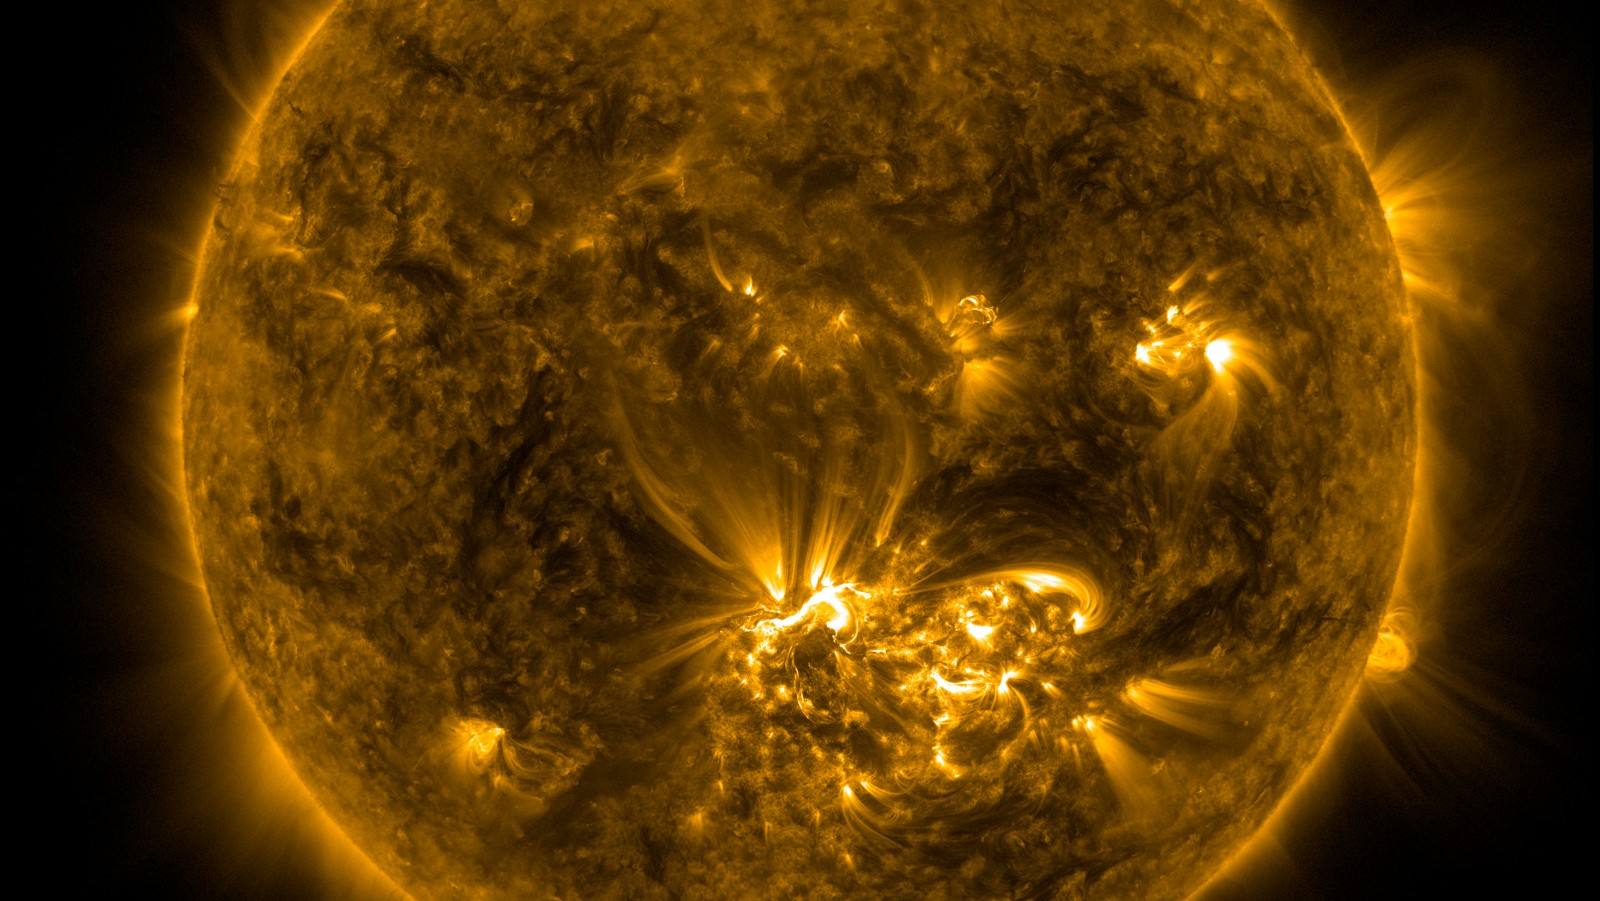 The Atmospheric Imaging Assembly on NASA's Solar Dynamics Observatory (SDO) captured these views of the flare in the Sun’s southern hemisphere on July 12, 2012. Photo courtesy of NASA